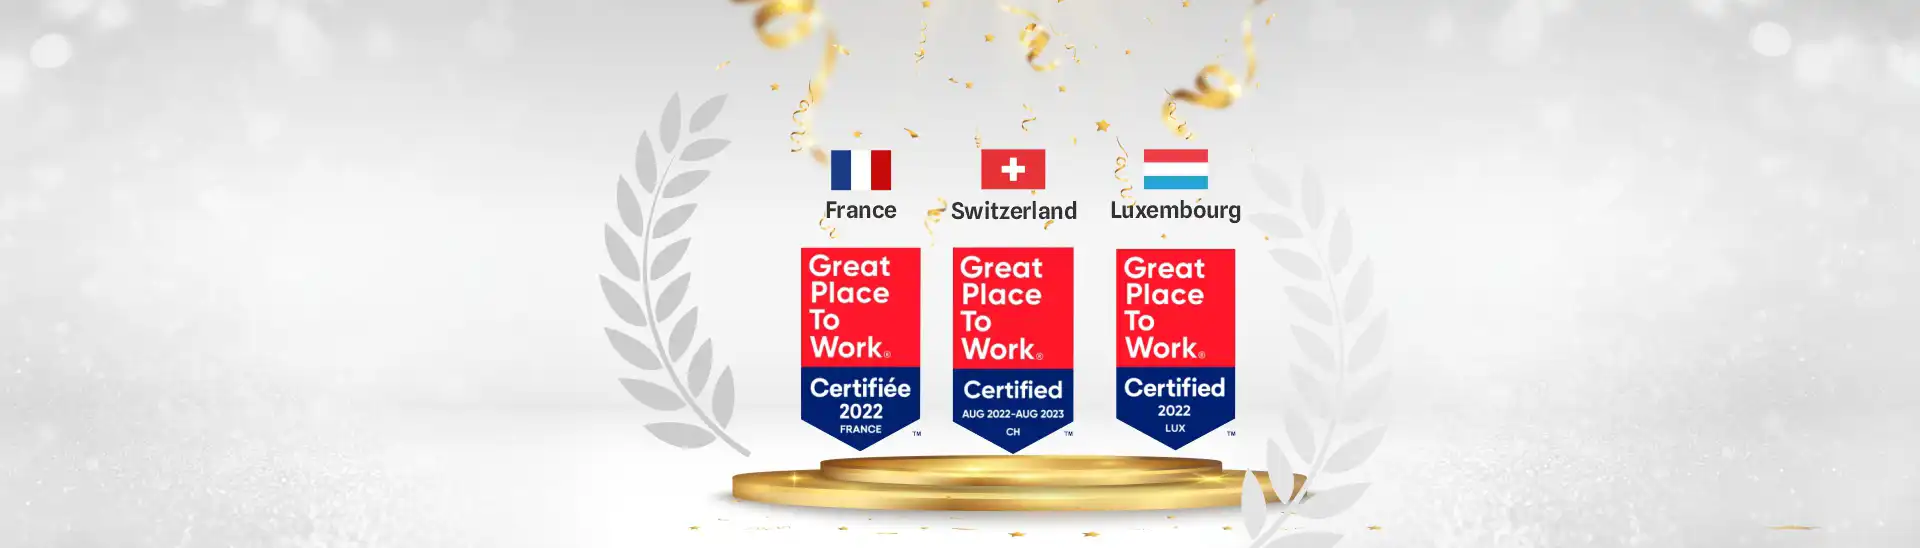 Synechron Named Great Place To Work® 2022 in France Luxembourg, and Switzerland